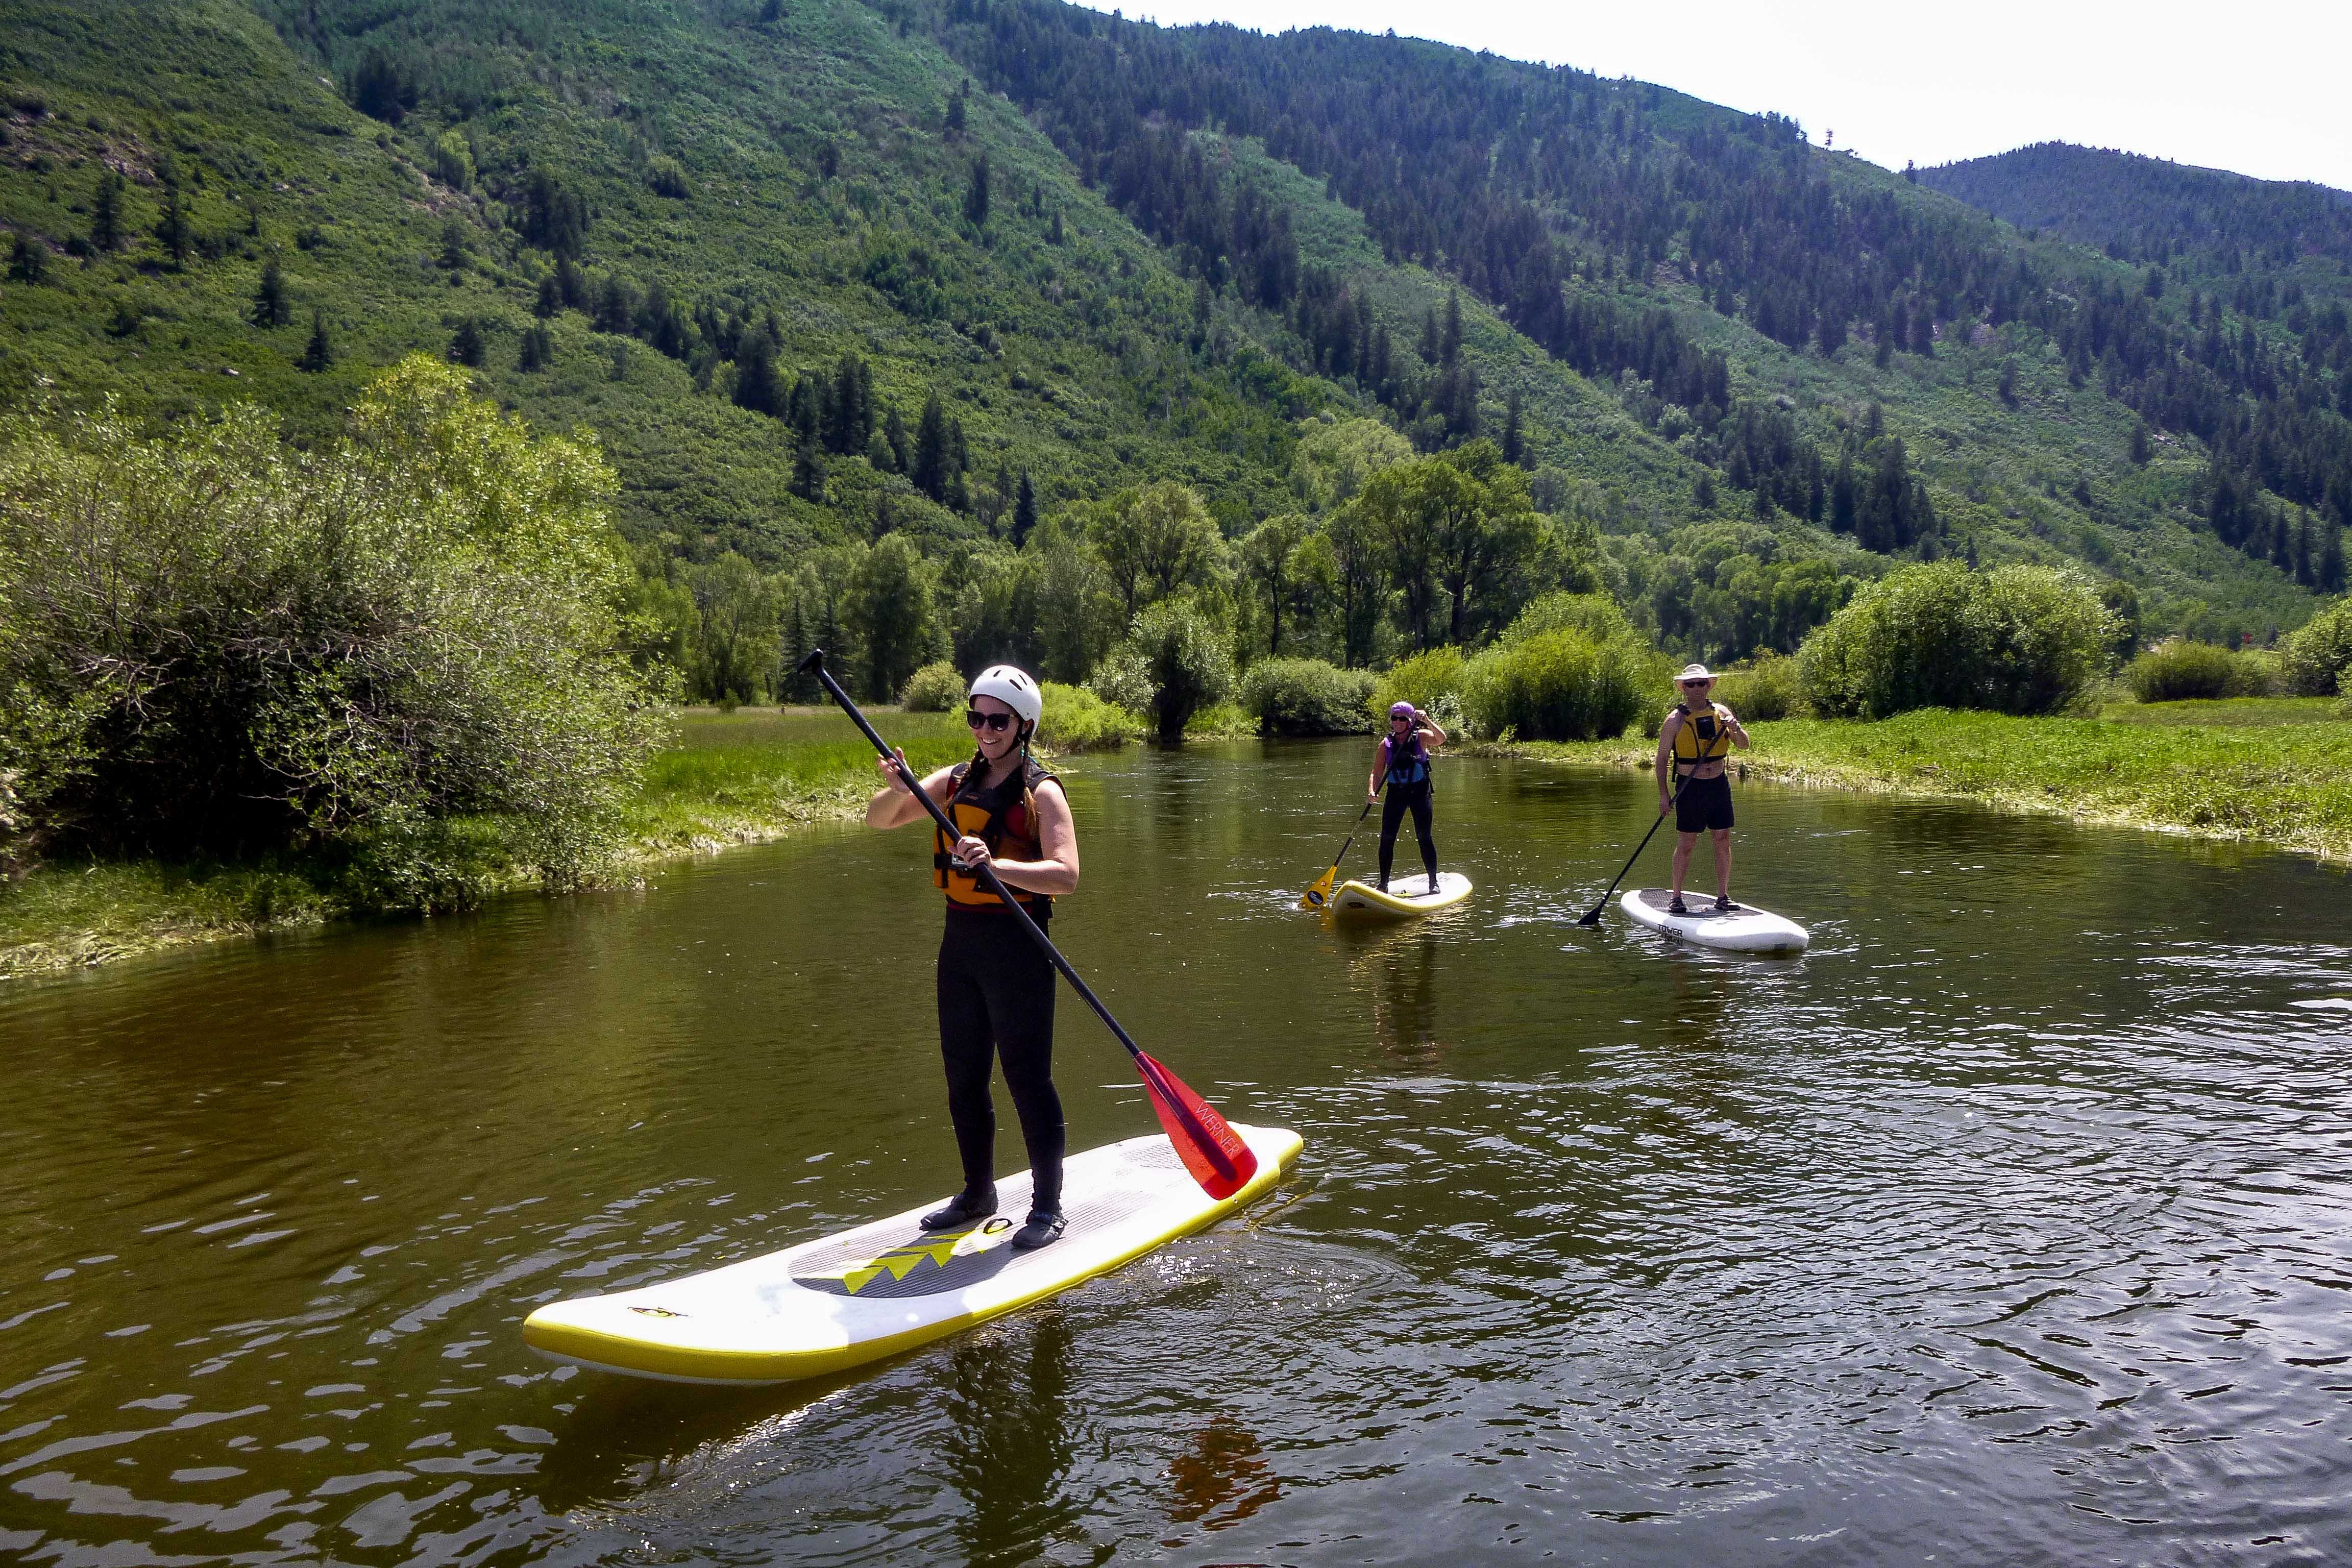 Beginner paddleboarders should take to calm waters, and sections of the Roaring Fork River are, surprisingly, perfect for this. Image by Emma Sparks / Lonely Planet